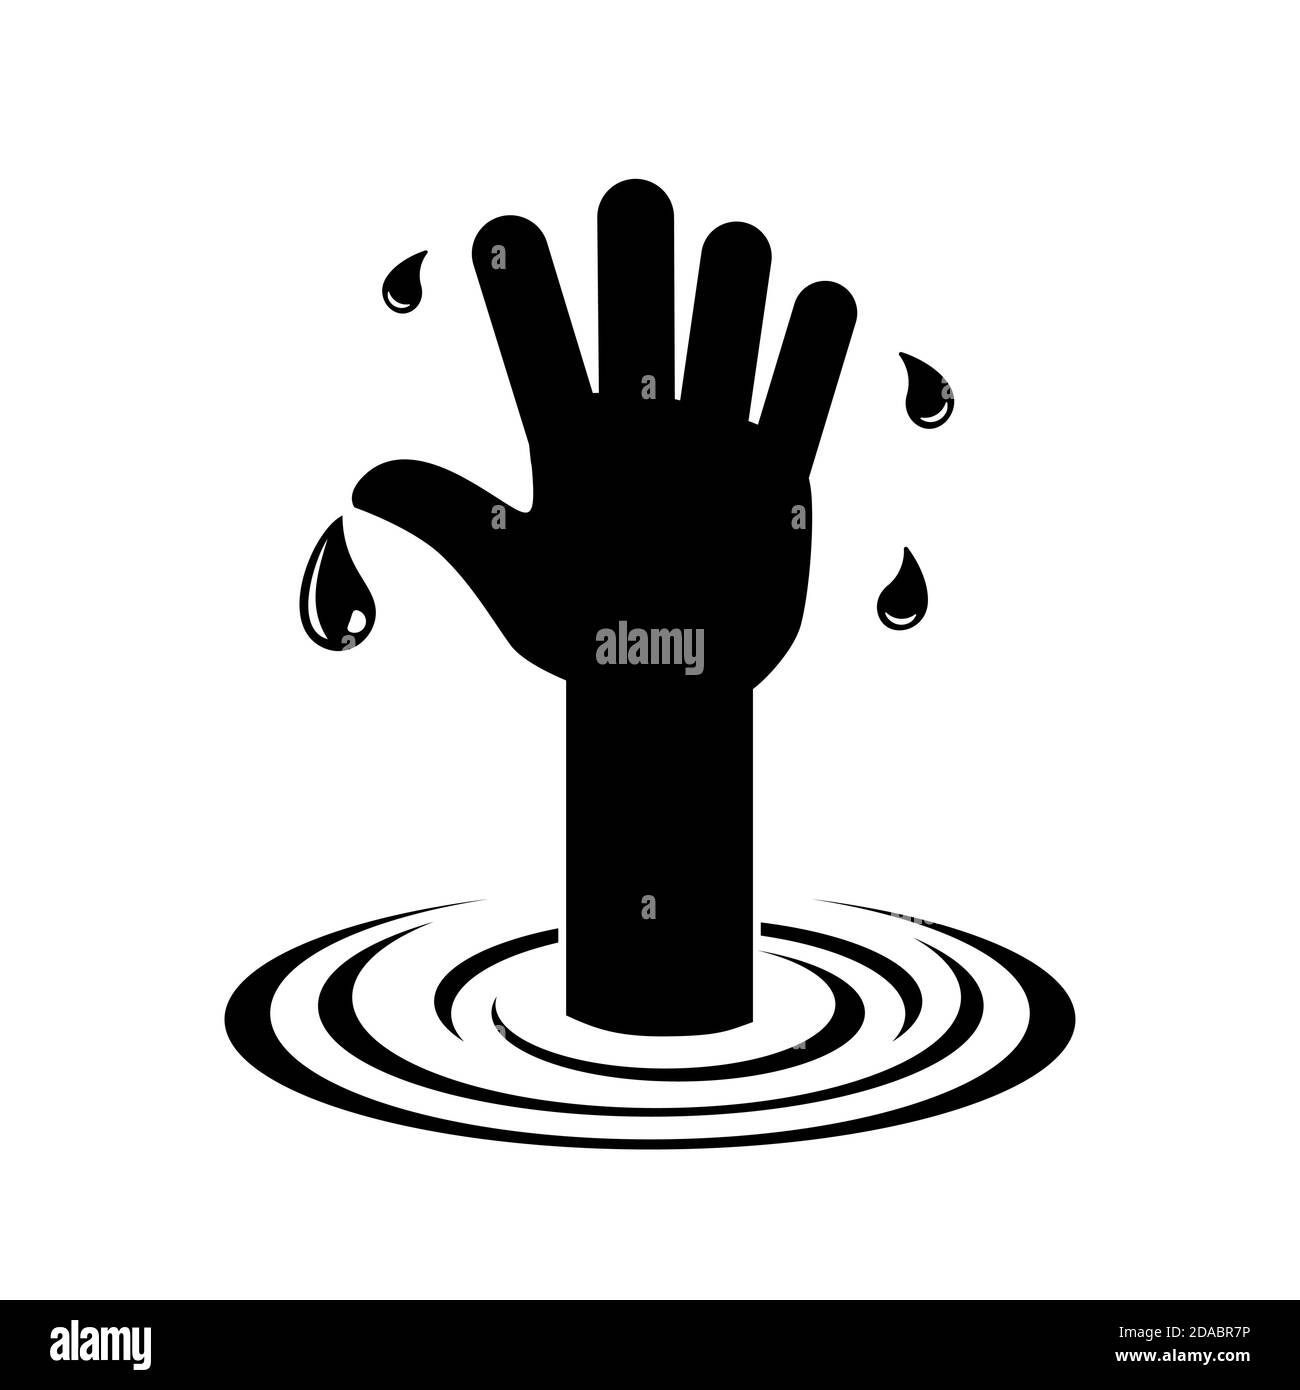 Request for help is the hand of a drowning man. The concept of financial crisis, fall, collapse. Abstract illustration, vector Stock Vector